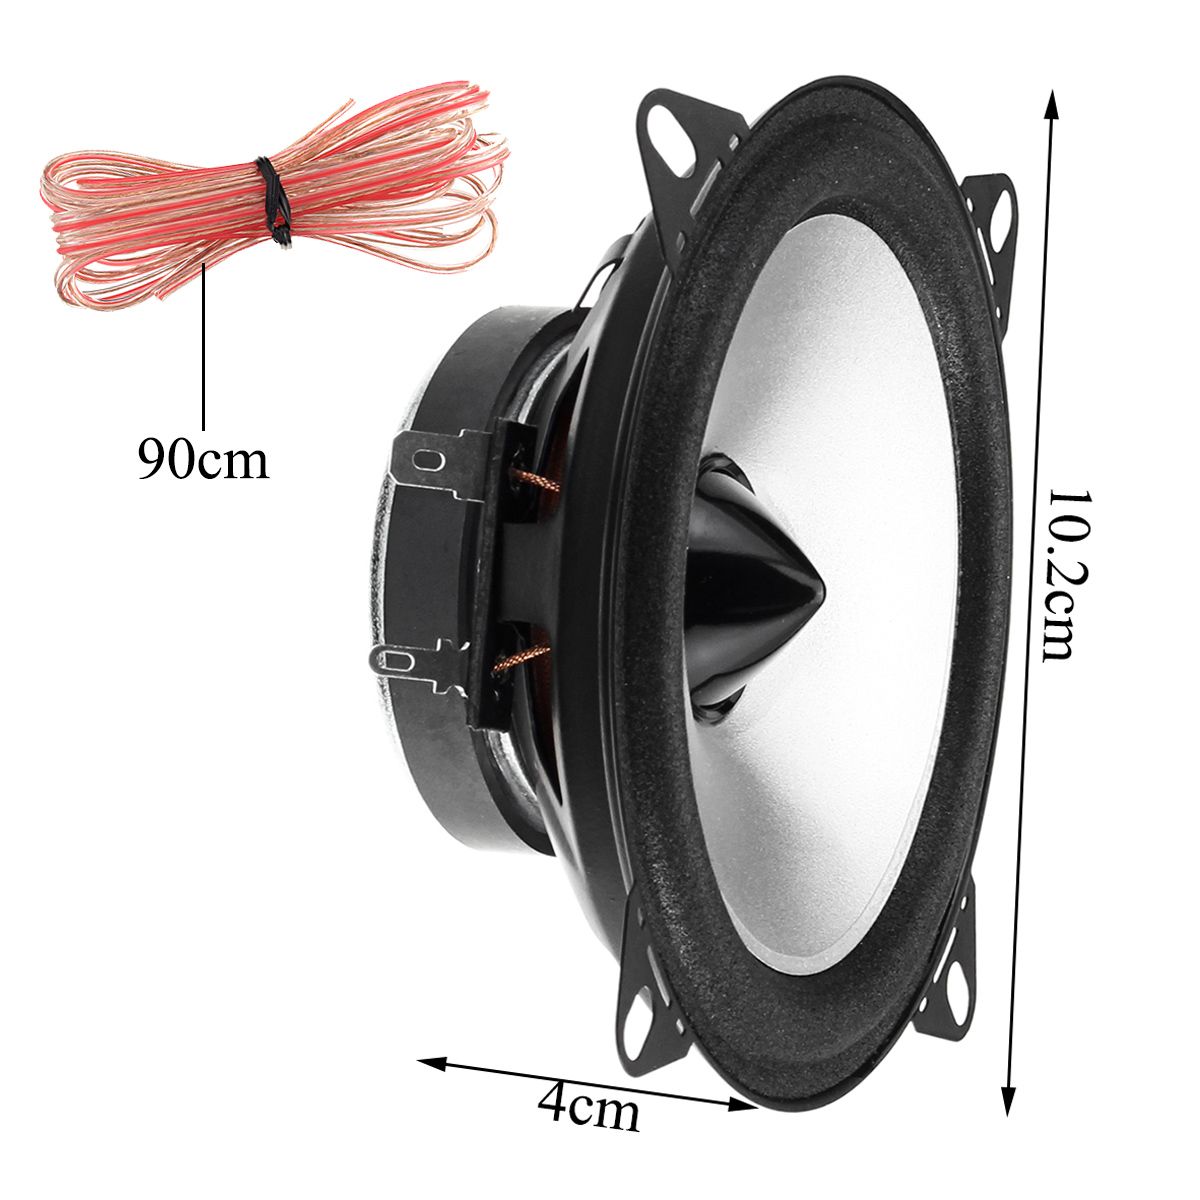 4-Inch-60W-88dB-Car-Audio-Coaxial-Speakers-Systems-Stereo-Loudspeaker-Subwoofer-1214012